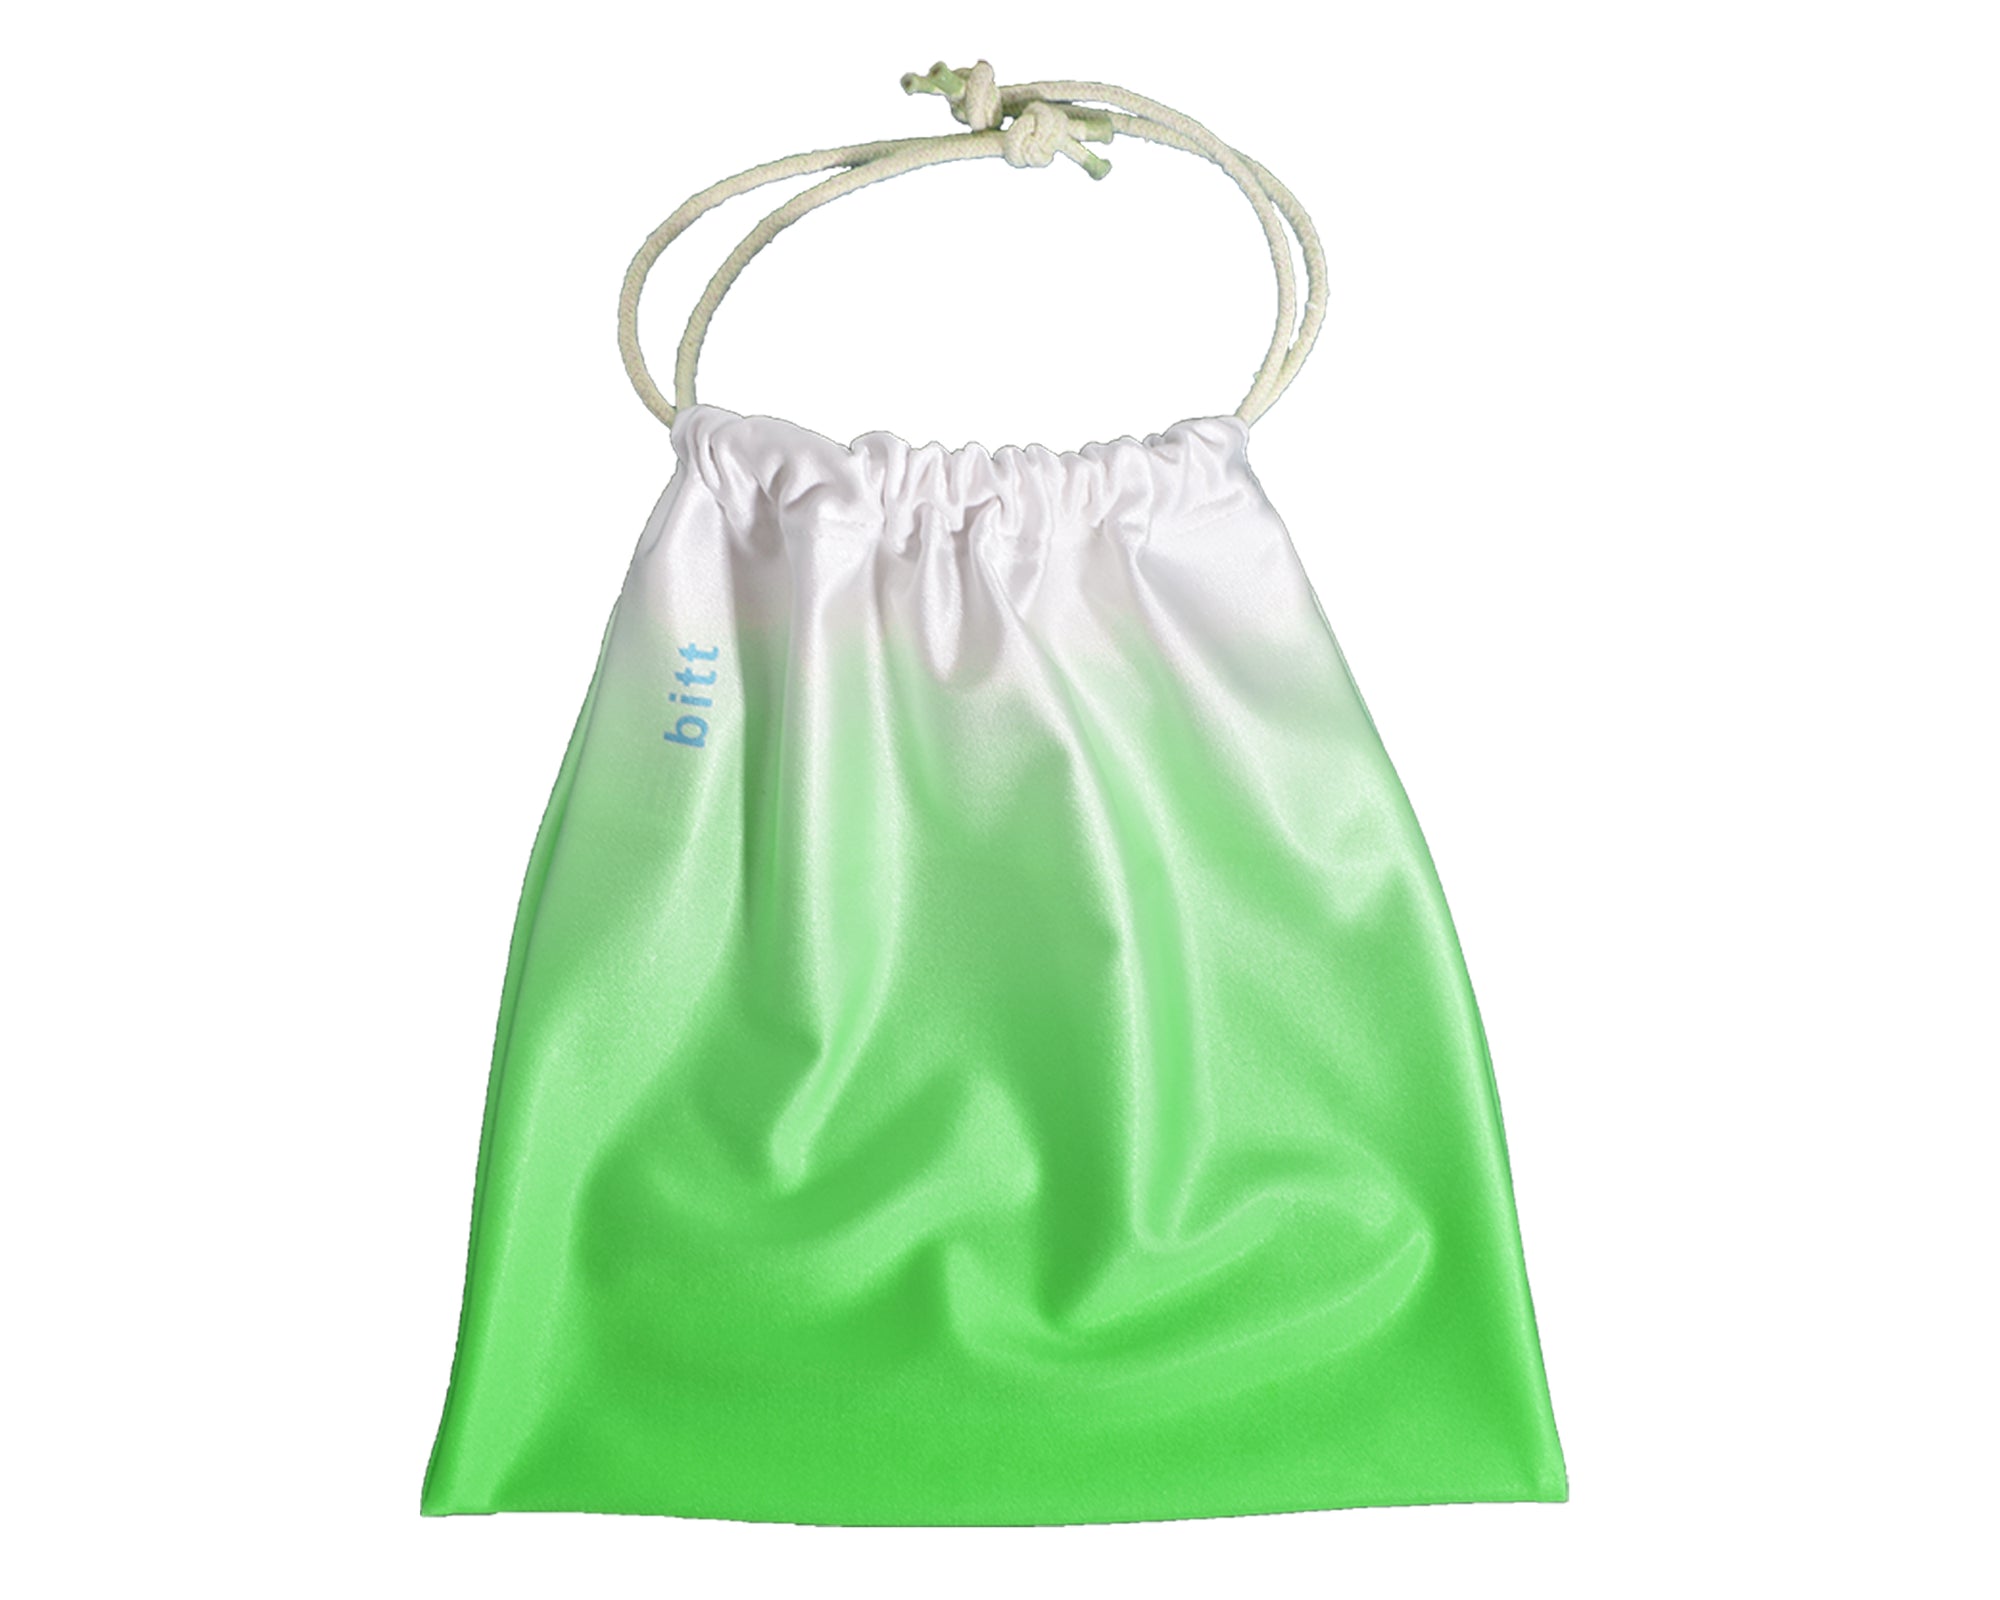 Gymnastics Grip Bag in Lime Green & White Ombre